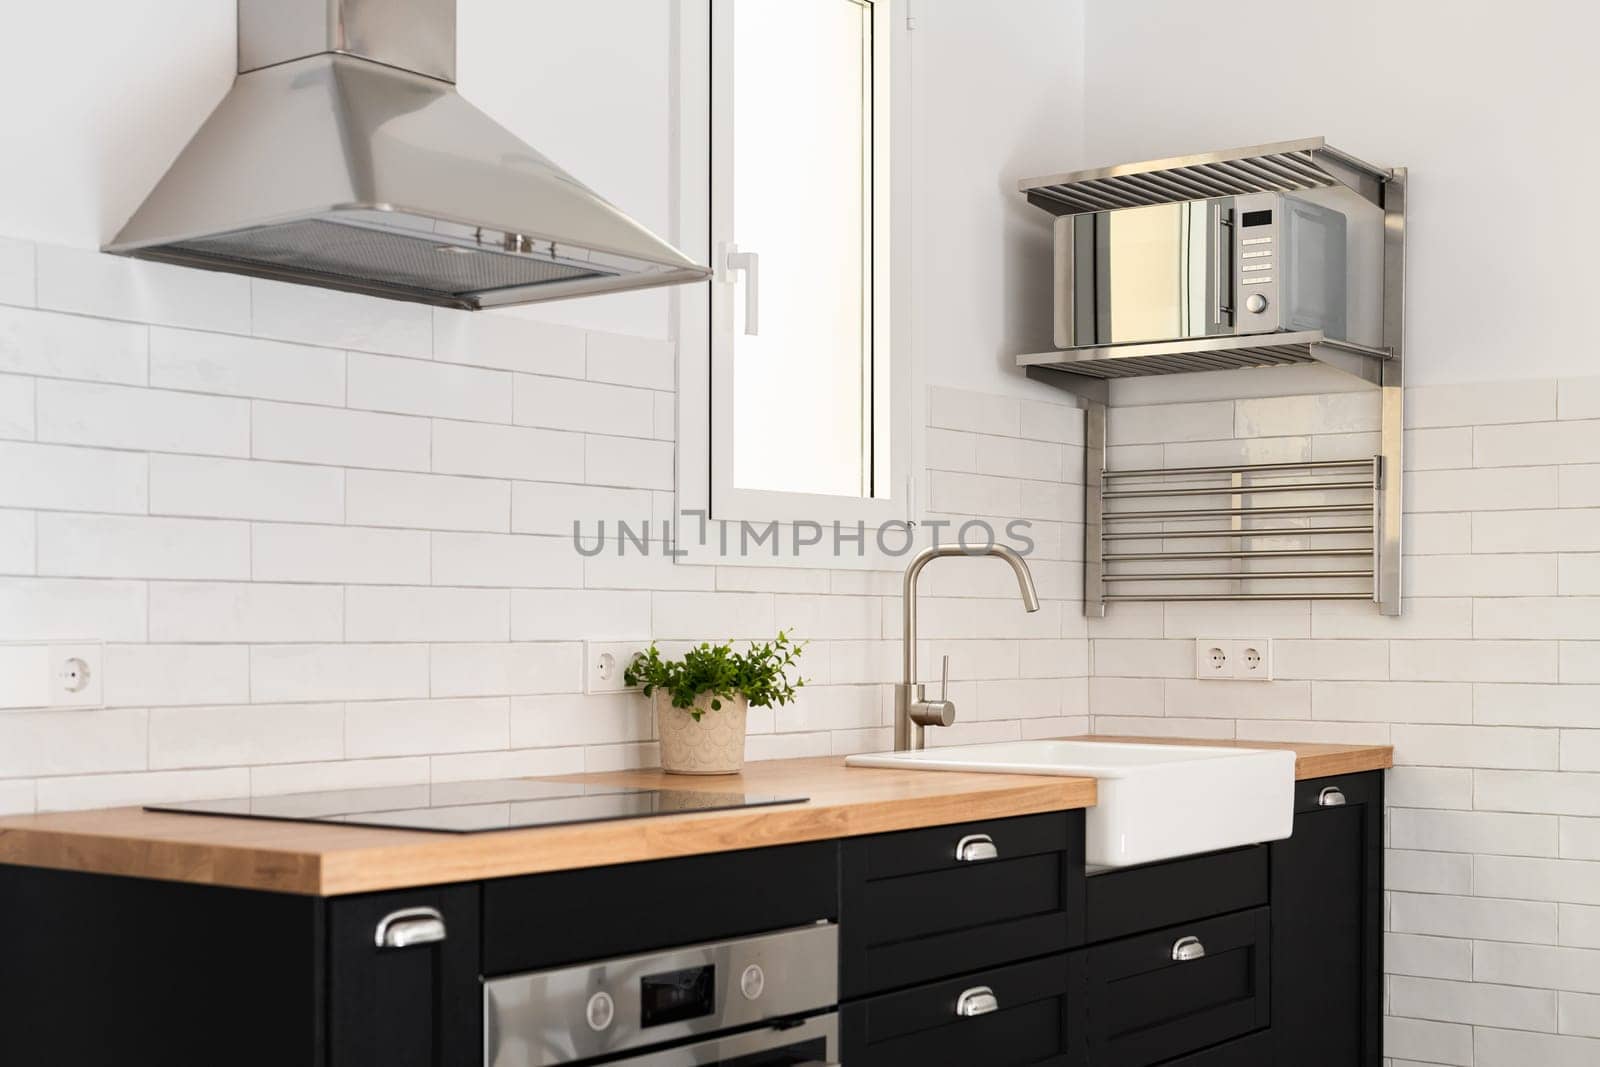 Modern devices for food preparation and sink in stylish kitchen. Renovated cooking area design with furniture and appliances in apartment